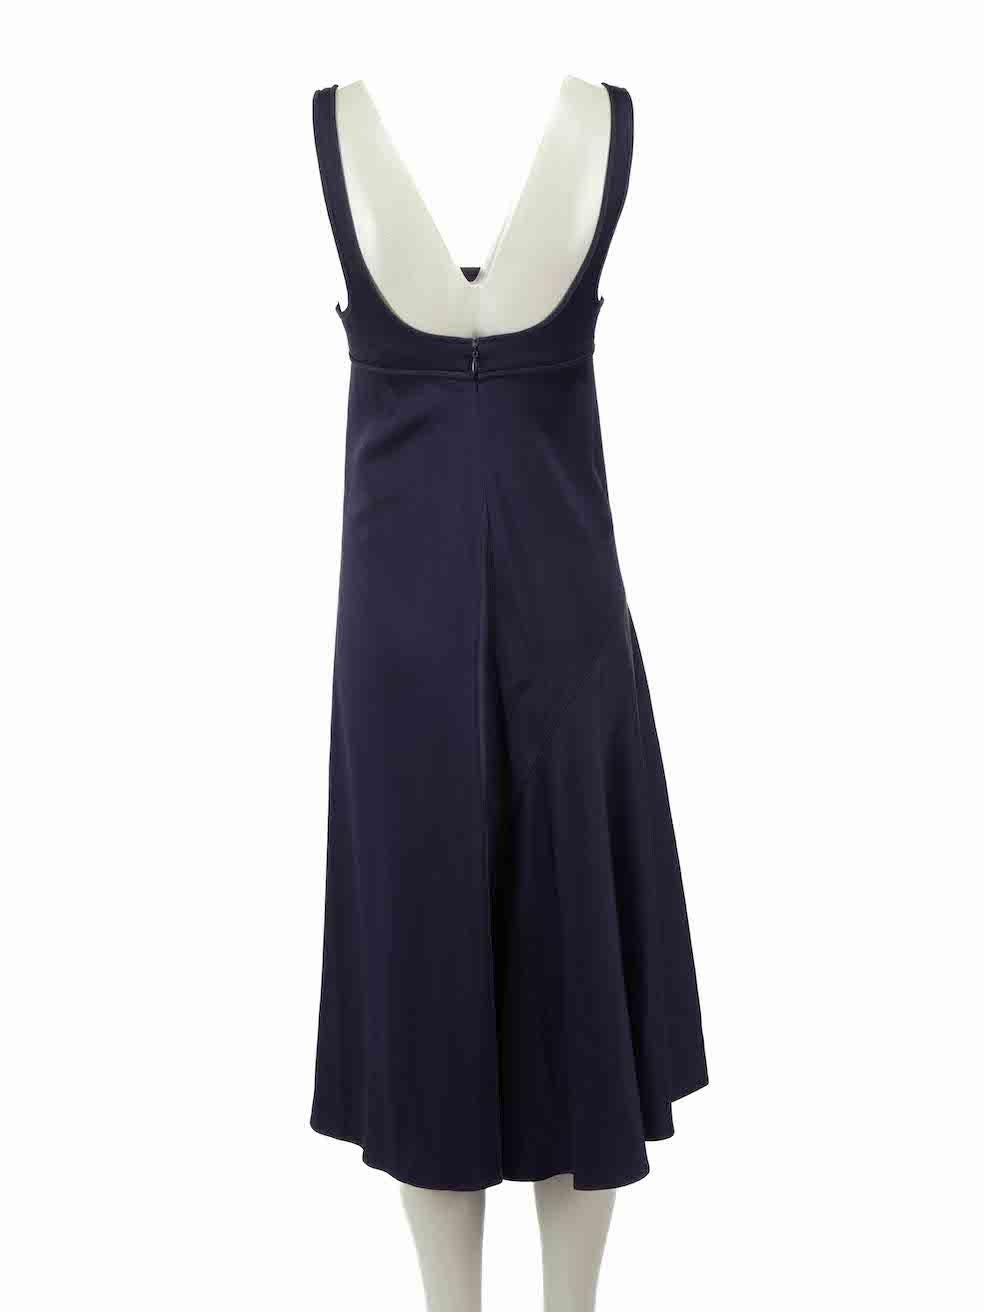 Victoria Beckham Navy Bustier Sleeveless Dress Size S In New Condition For Sale In London, GB